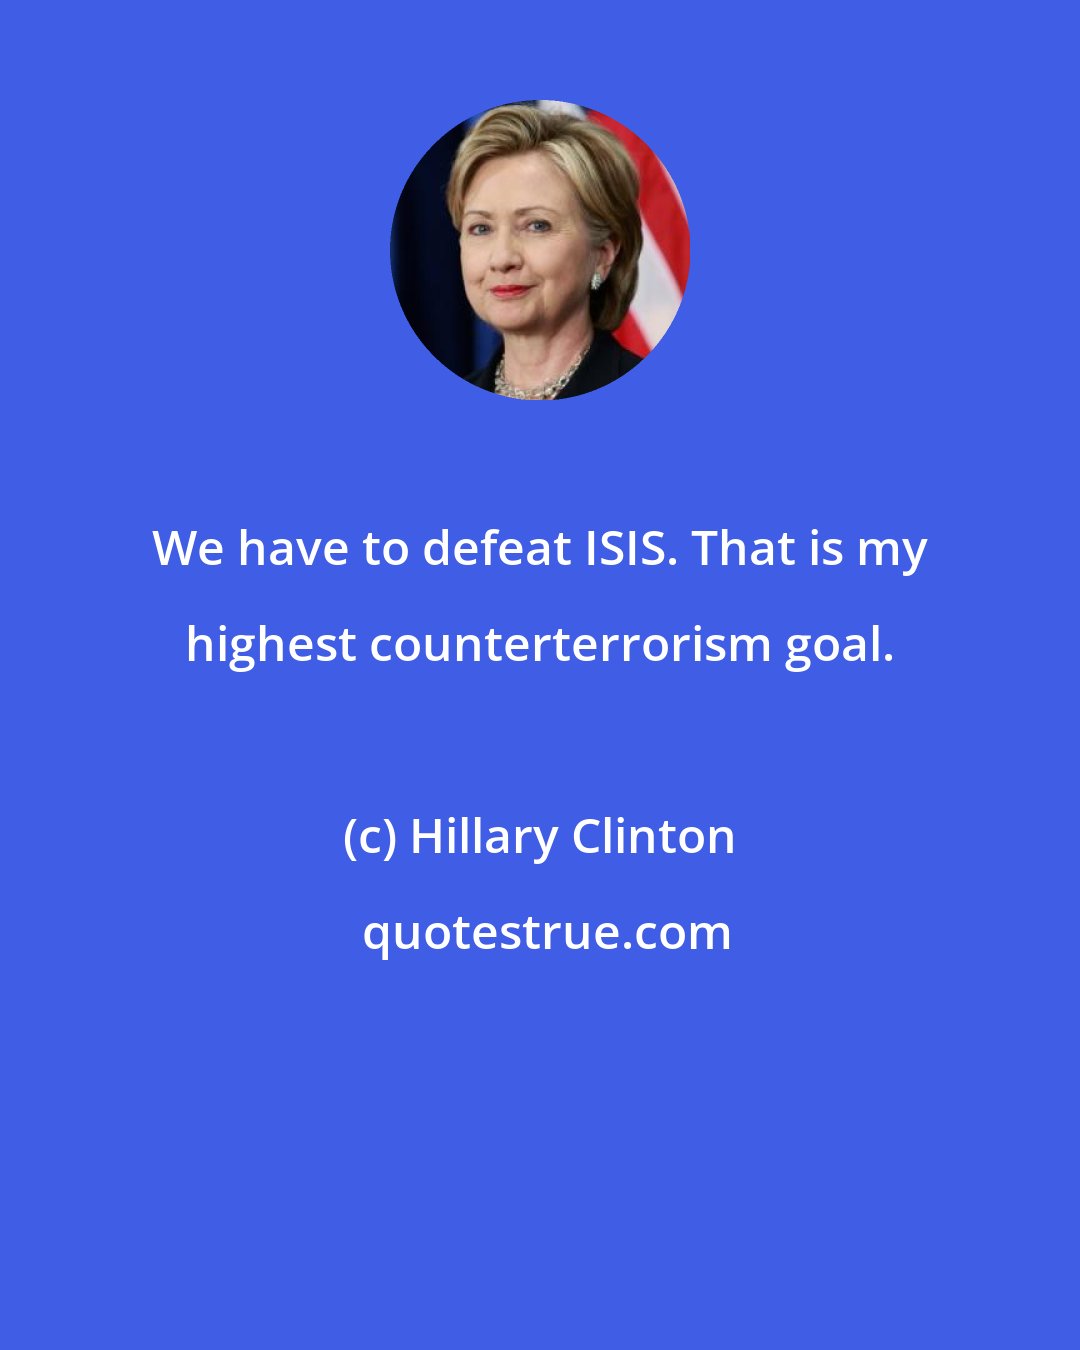 Hillary Clinton: We have to defeat ISIS. That is my highest counterterrorism goal.